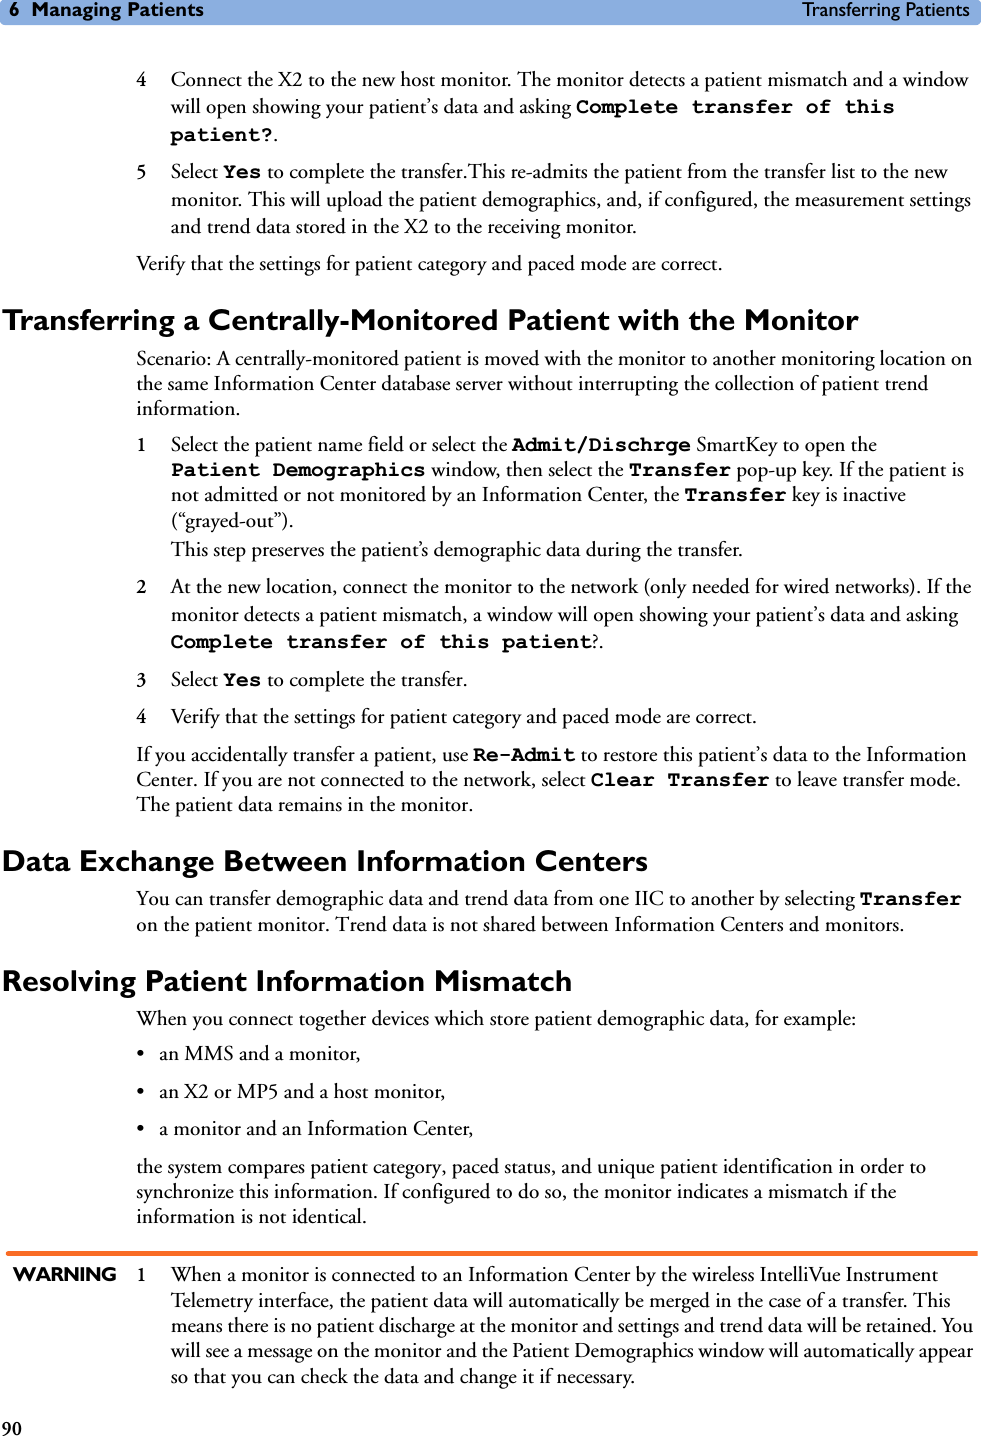 6 Managing Patients Transferring Patients904Connect the X2 to the new host monitor. The monitor detects a patient mismatch and a window will open showing your patient’s data and asking Complete transfer of this patient?.5Select Yes to complete the transfer.This re-admits the patient from the transfer list to the new monitor. This will upload the patient demographics, and, if configured, the measurement settings and trend data stored in the X2 to the receiving monitor.Verify that the settings for patient category and paced mode are correct.Transferring a Centrally-Monitored Patient with the MonitorScenario: A centrally-monitored patient is moved with the monitor to another monitoring location on the same Information Center database server without interrupting the collection of patient trend information.1Select the patient name field or select the Admit/Dischrge SmartKey to open the Patient Demographics window, then select the Transfer pop-up key. If the patient is not admitted or not monitored by an Information Center, the Transfer key is inactive (“grayed-out”). This step preserves the patient’s demographic data during the transfer. 2At the new location, connect the monitor to the network (only needed for wired networks). If the monitor detects a patient mismatch, a window will open showing your patient’s data and asking Complete transfer of this patient?.3Select Yes to complete the transfer.4Verify that the settings for patient category and paced mode are correct. If you accidentally transfer a patient, use Re-Admit to restore this patient’s data to the Information Center. If you are not connected to the network, select Clear Transfer to leave transfer mode. The patient data remains in the monitor.Data Exchange Between Information CentersYou can transfer demographic data and trend data from one IIC to another by selecting Transfer on the patient monitor. Trend data is not shared between Information Centers and monitors. Resolving Patient Information MismatchWhen you connect together devices which store patient demographic data, for example:• an MMS and a monitor, • an X2 or MP5 and a host monitor, • a monitor and an Information Center, the system compares patient category, paced status, and unique patient identification in order to synchronize this information. If configured to do so, the monitor indicates a mismatch if the information is not identical.WARNING 1When a monitor is connected to an Information Center by the wireless IntelliVue Instrument Telemetry interface, the patient data will automatically be merged in the case of a transfer. This means there is no patient discharge at the monitor and settings and trend data will be retained. You will see a message on the monitor and the Patient Demographics window will automatically appear so that you can check the data and change it if necessary.